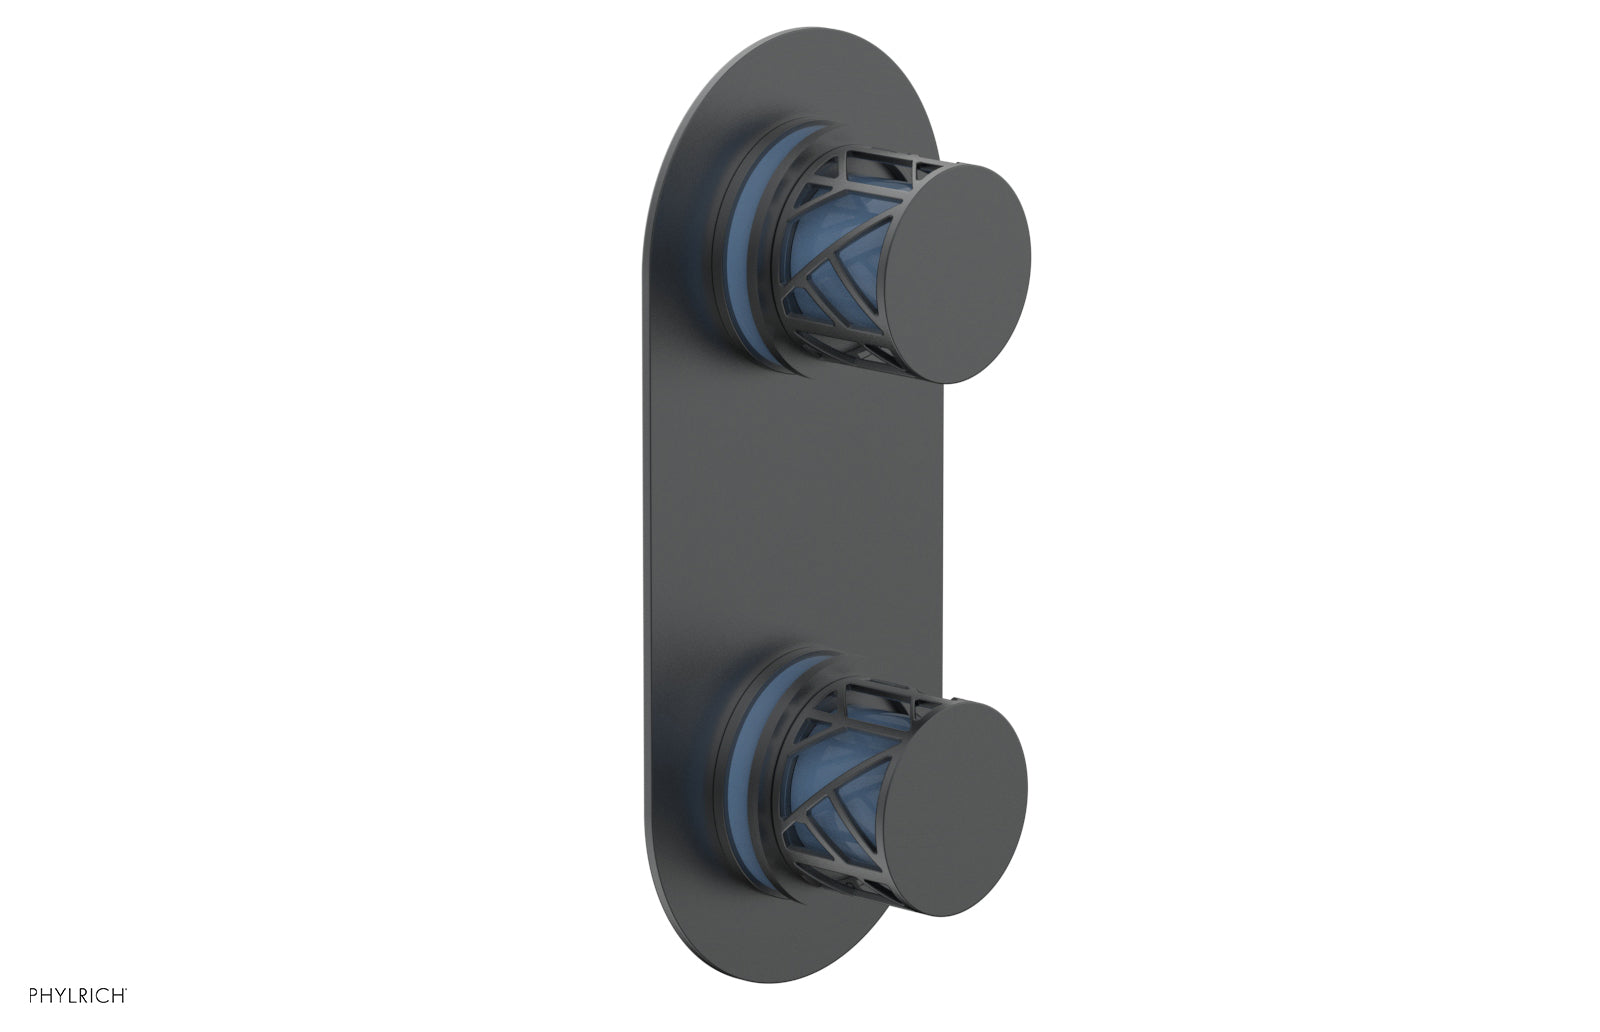 Phylrich JOLIE Thermostatic Valve with Volume Control or Diverter with "Light Blue" Accents